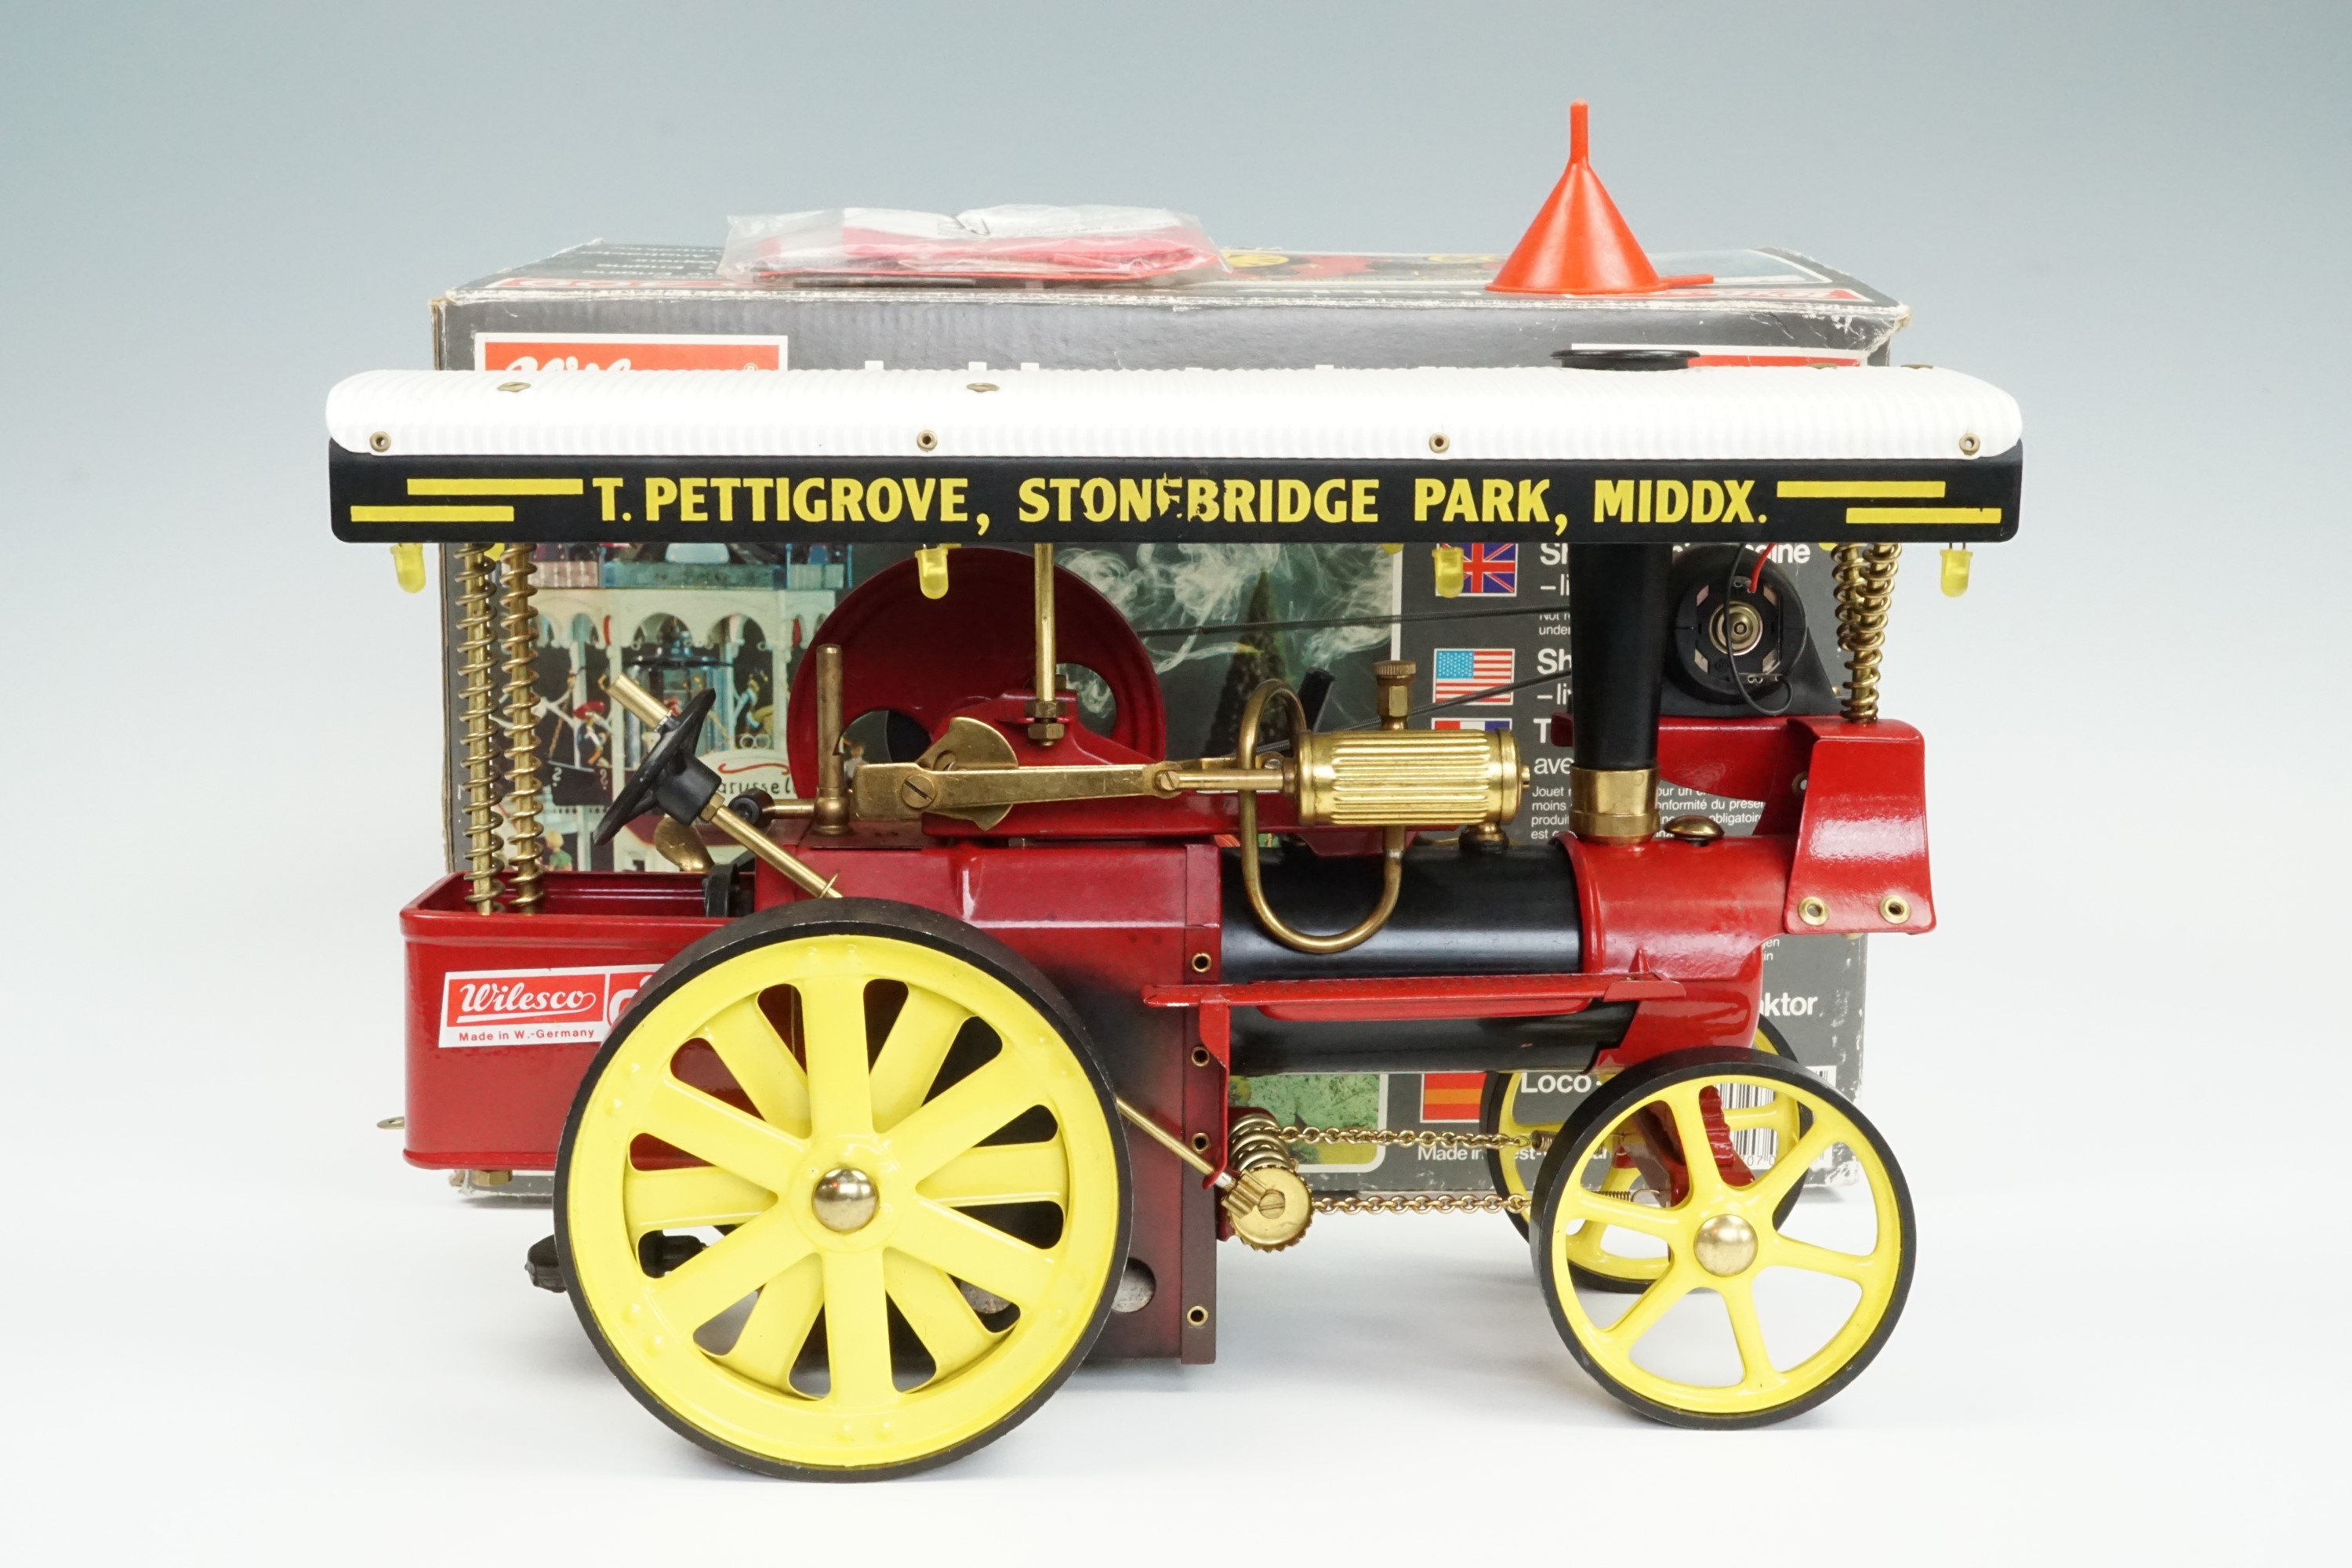 A boxed Wilesco Hobby-Technik D409 Showman's live steam traction engine